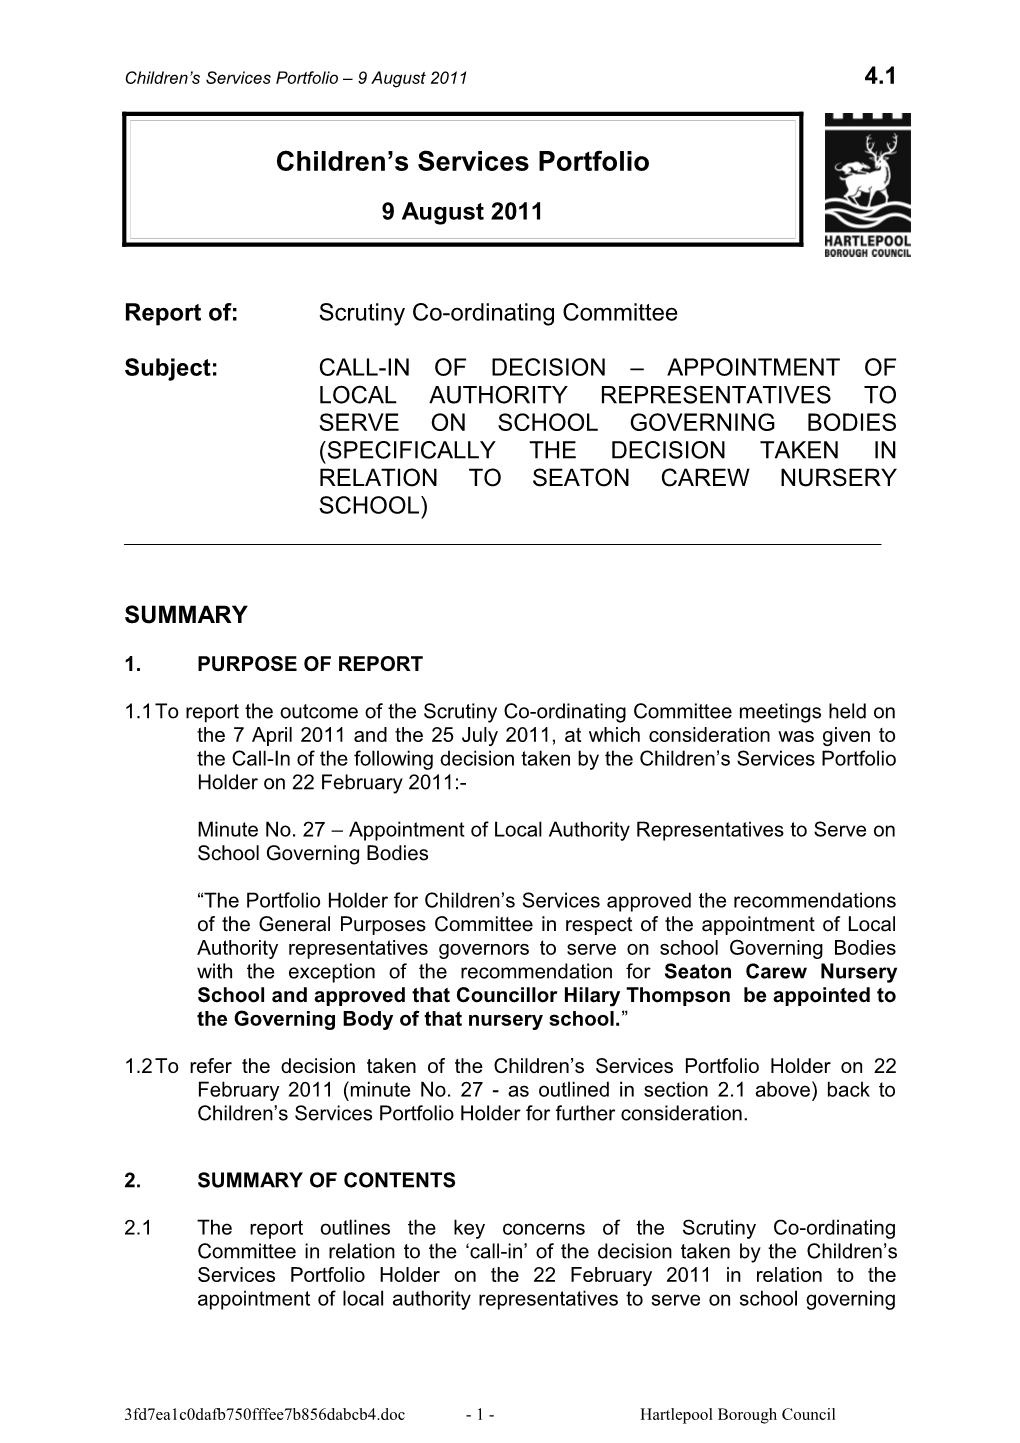 Report Of:Scrutiny Co-Ordinating Committee